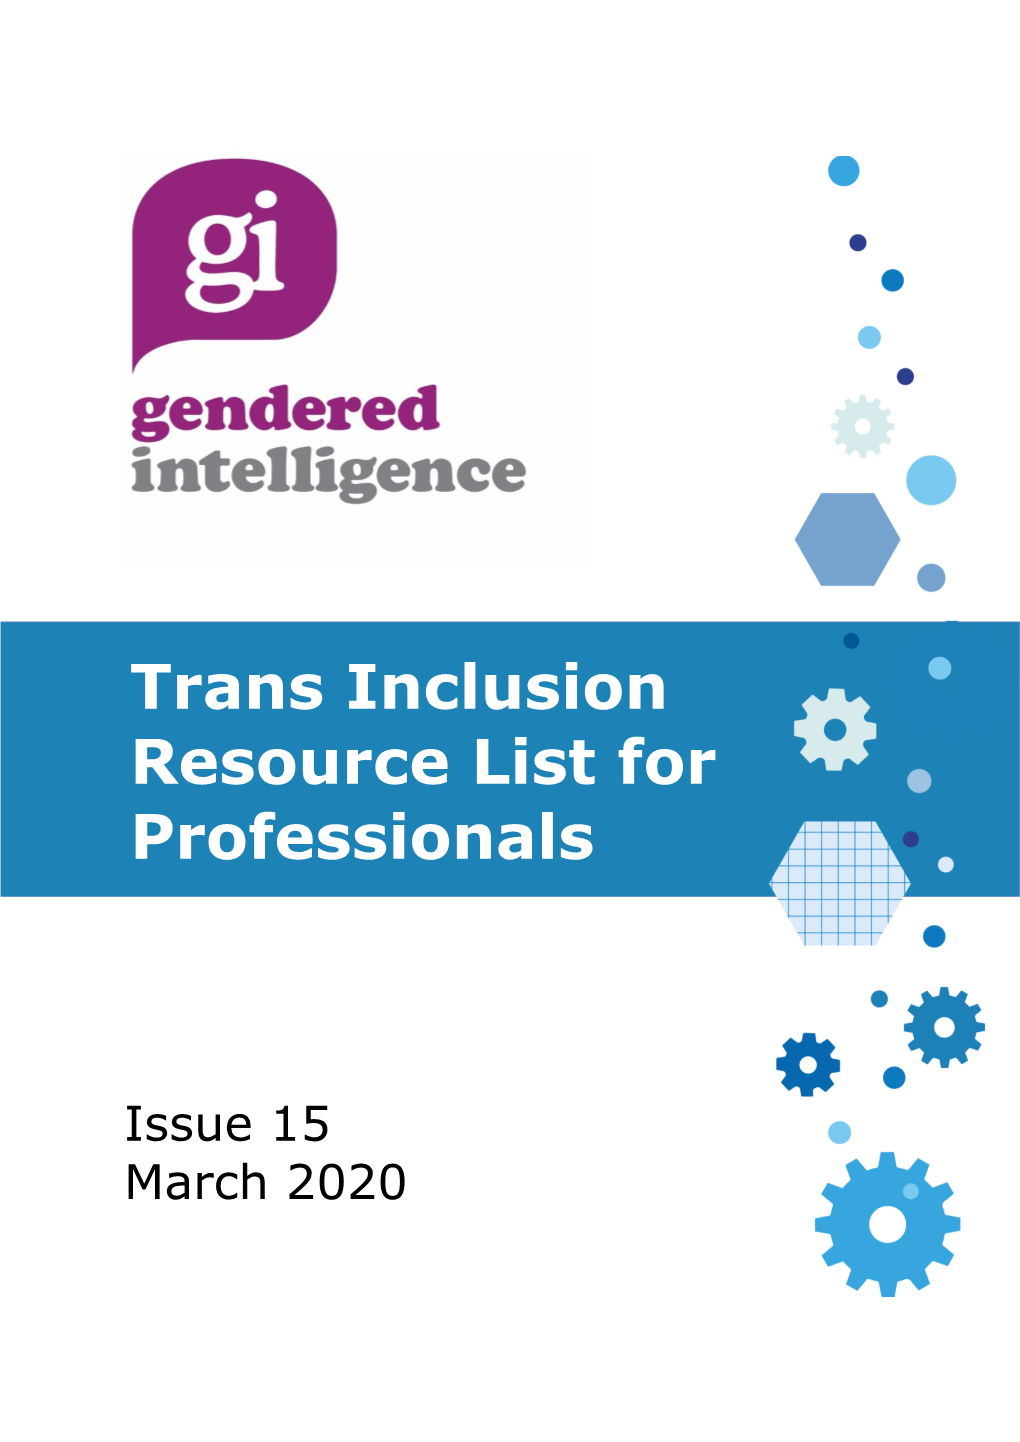 Trans Inclusion Resource List for Professionals